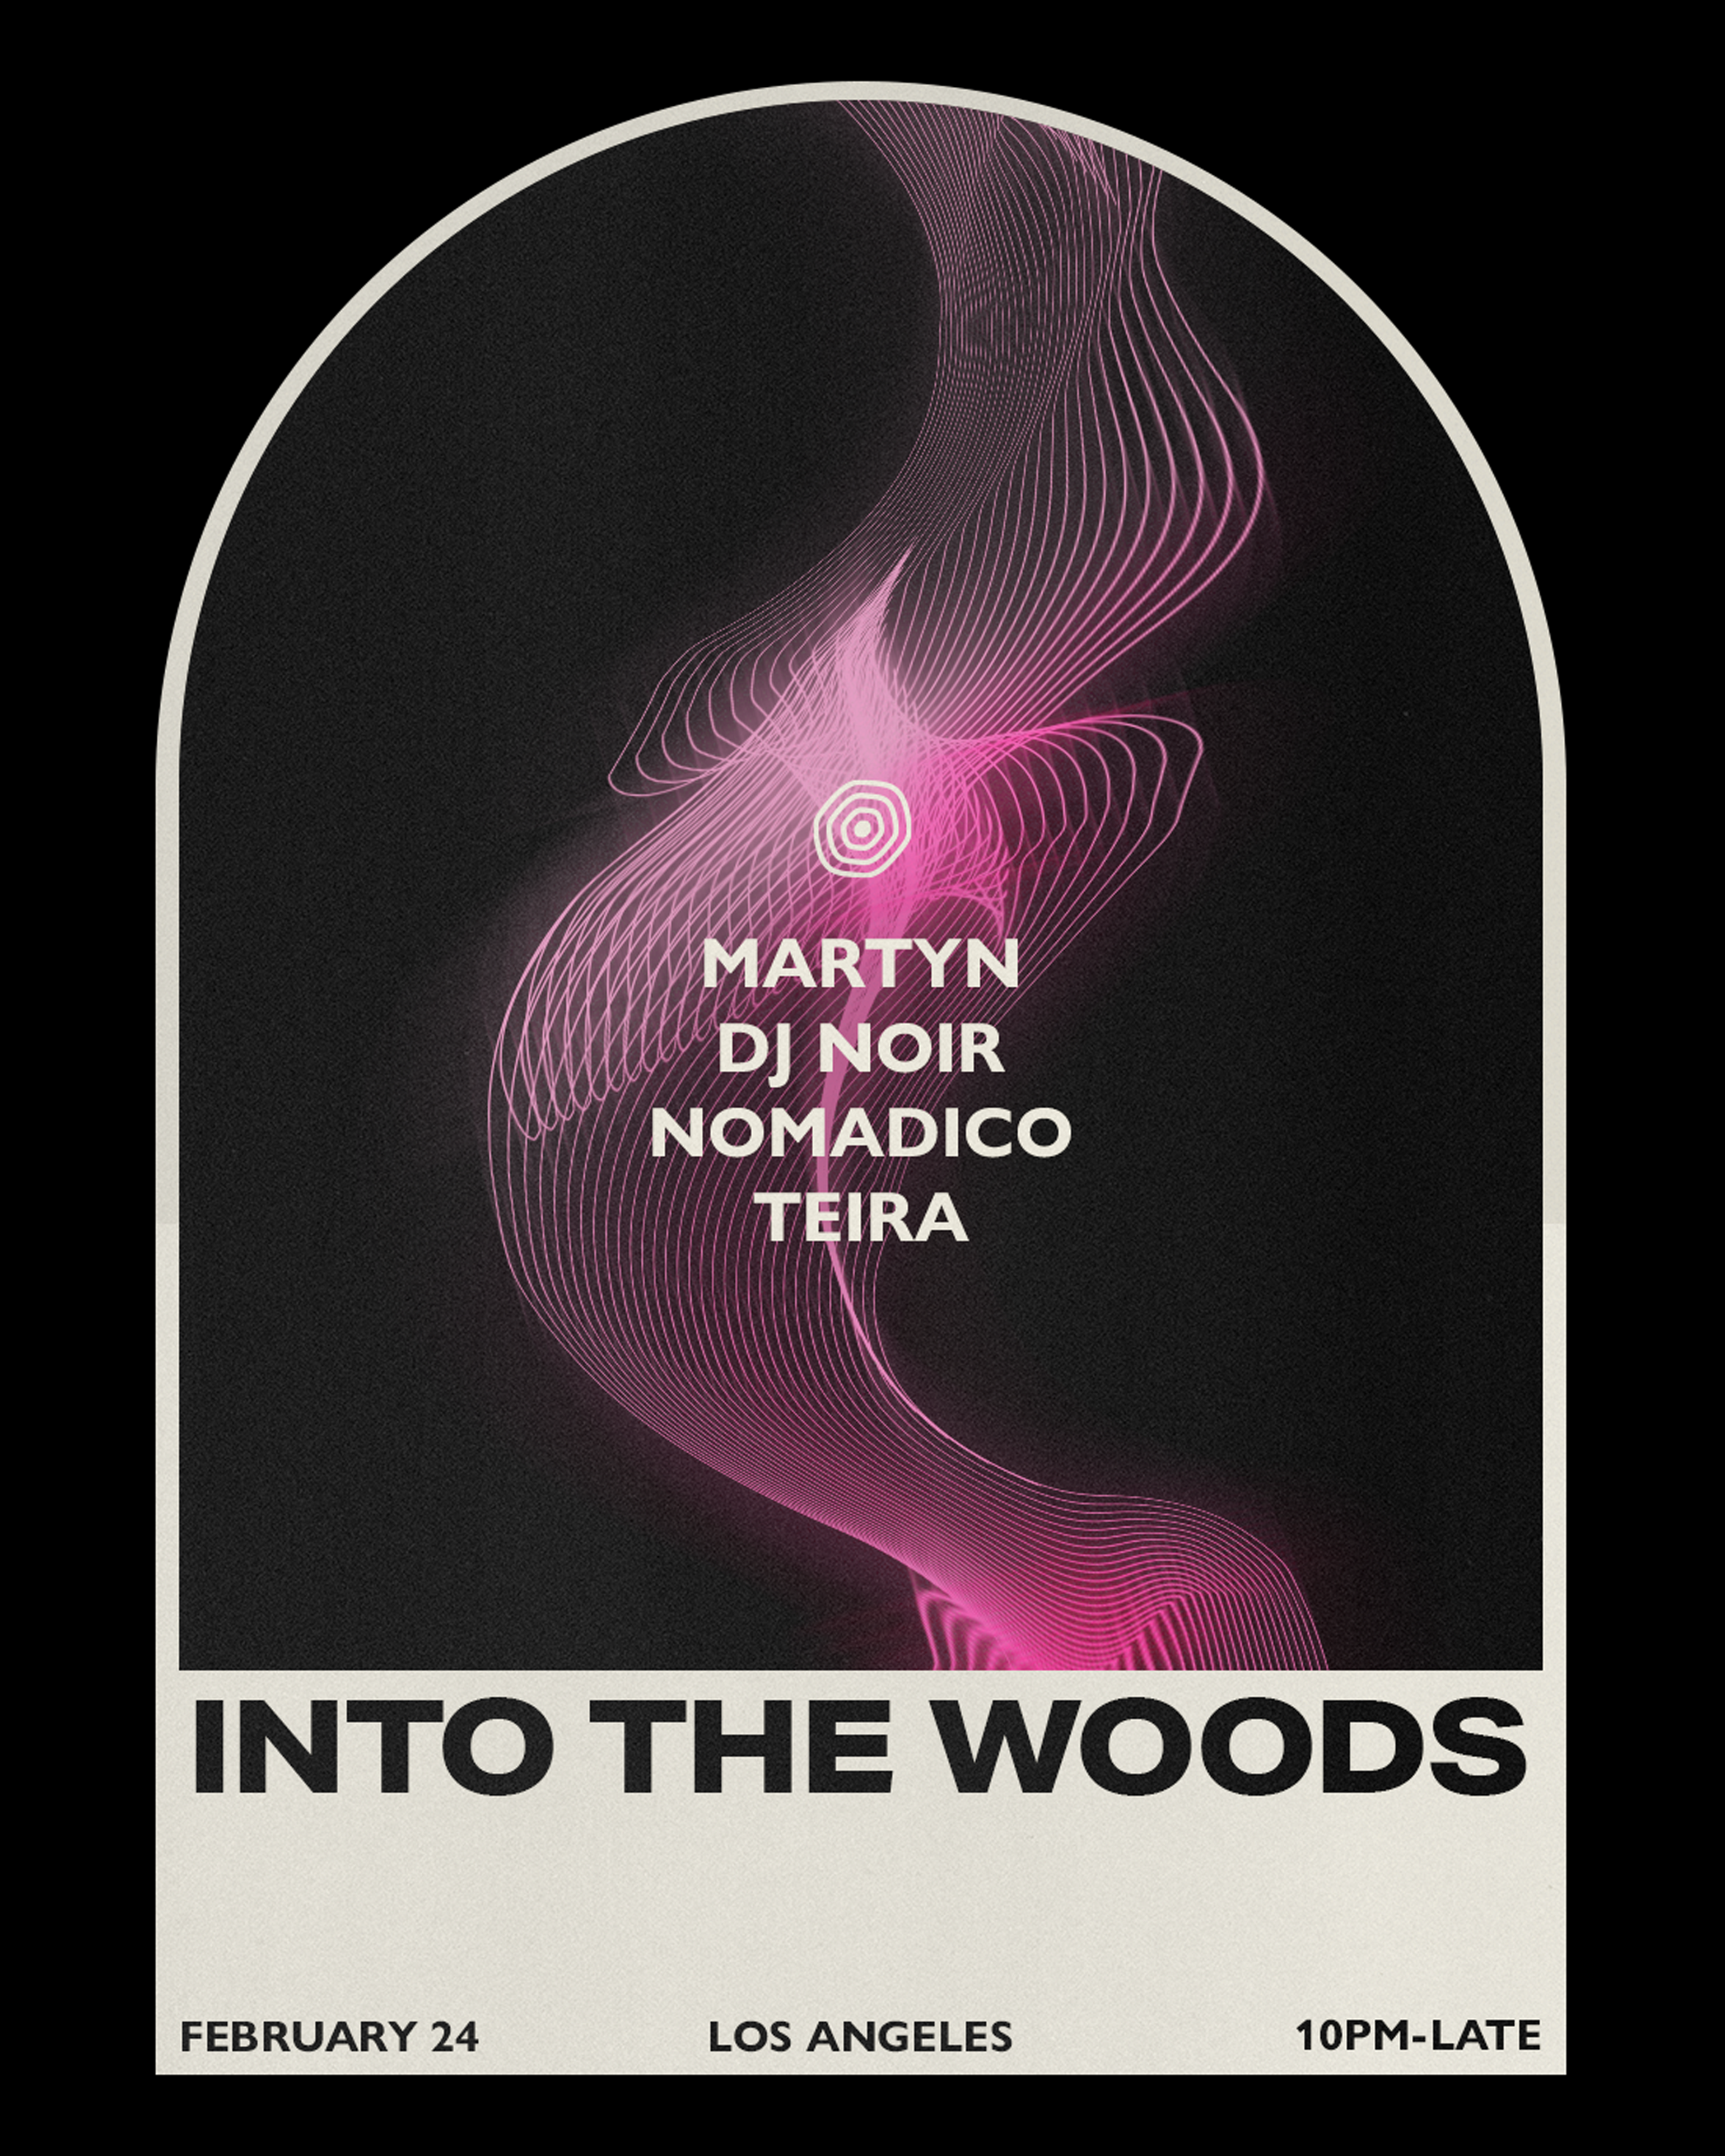 Into The Woods feat. Martyn, DJ Noir, Nomadico, and Teira - フライヤー表